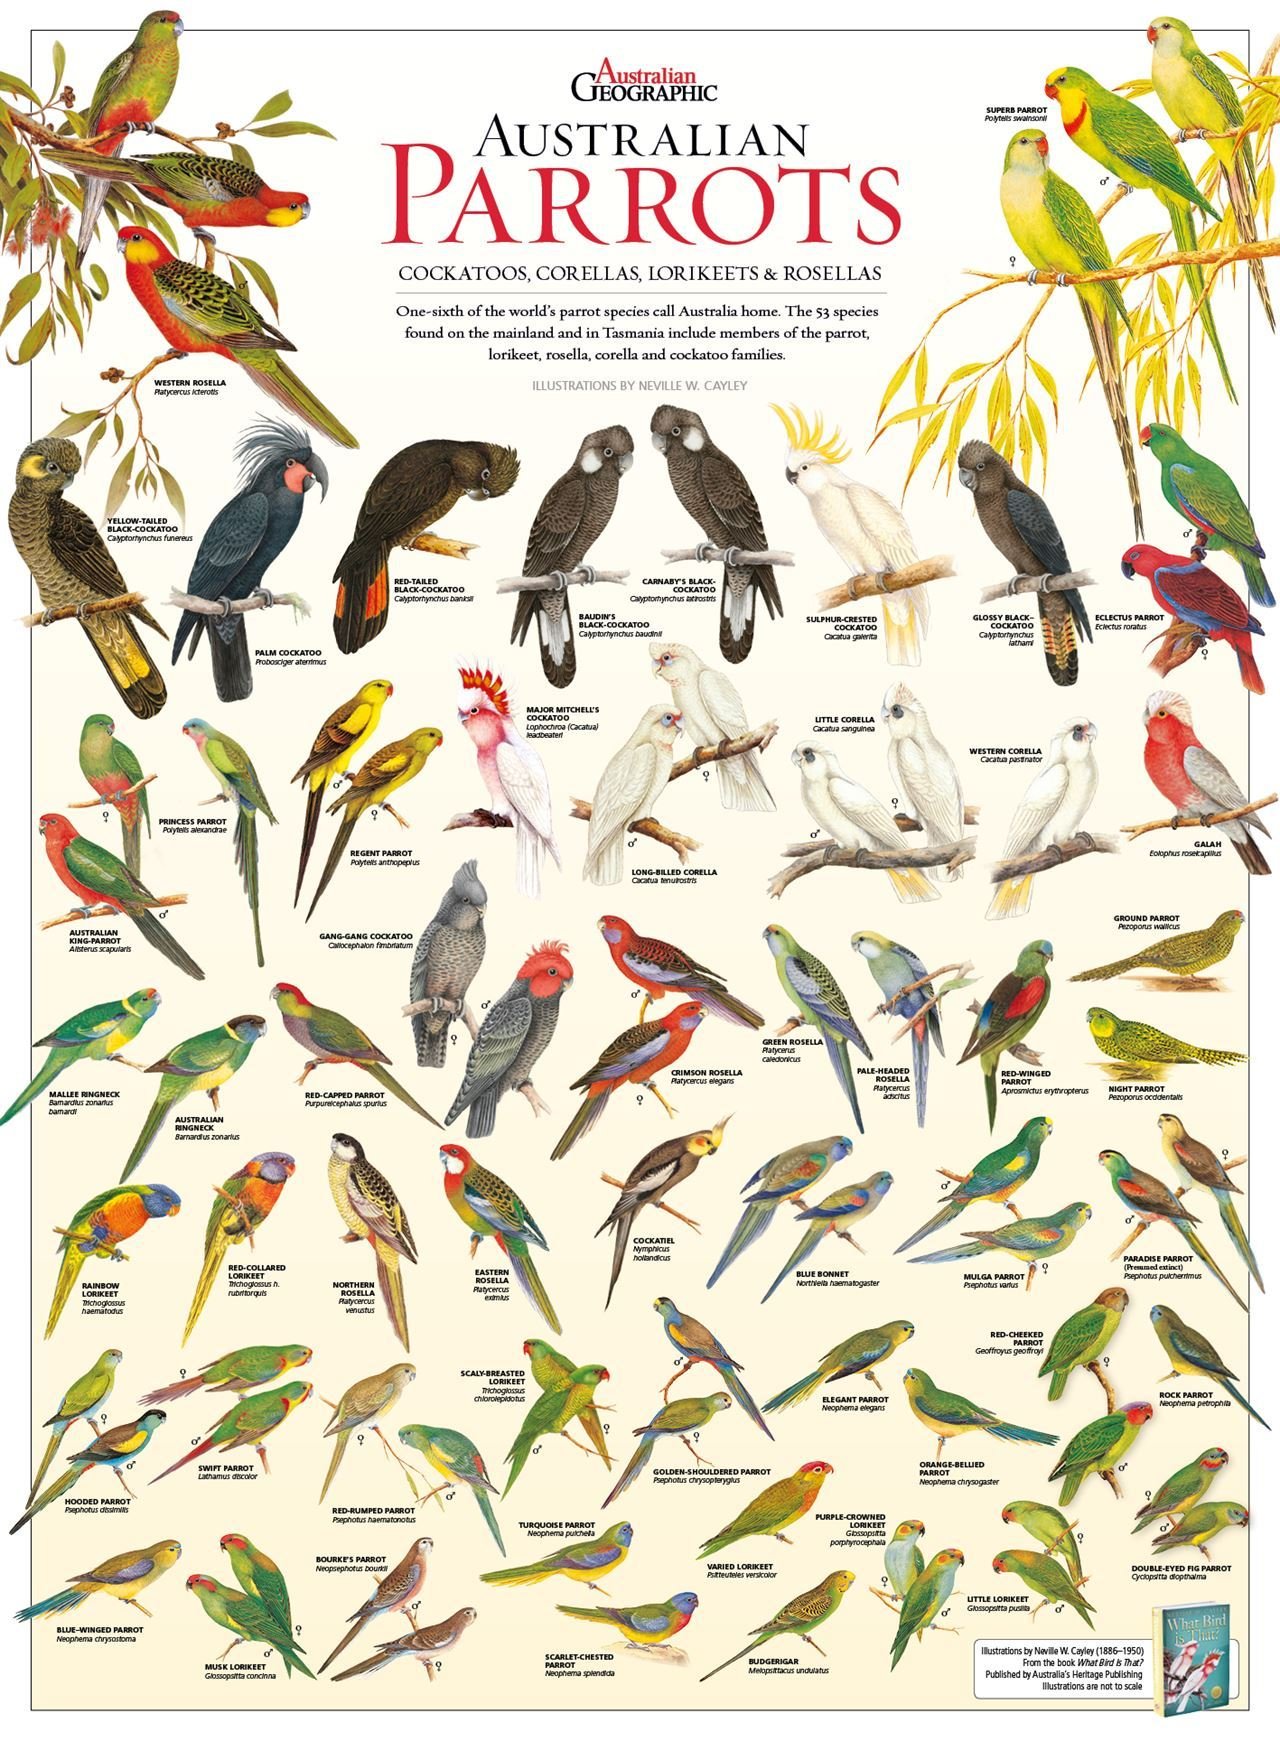 overgive Enhed forælder Australian Geographic Shop: On World Parrot Day, get to know Australia's  most colourful birds | Milled